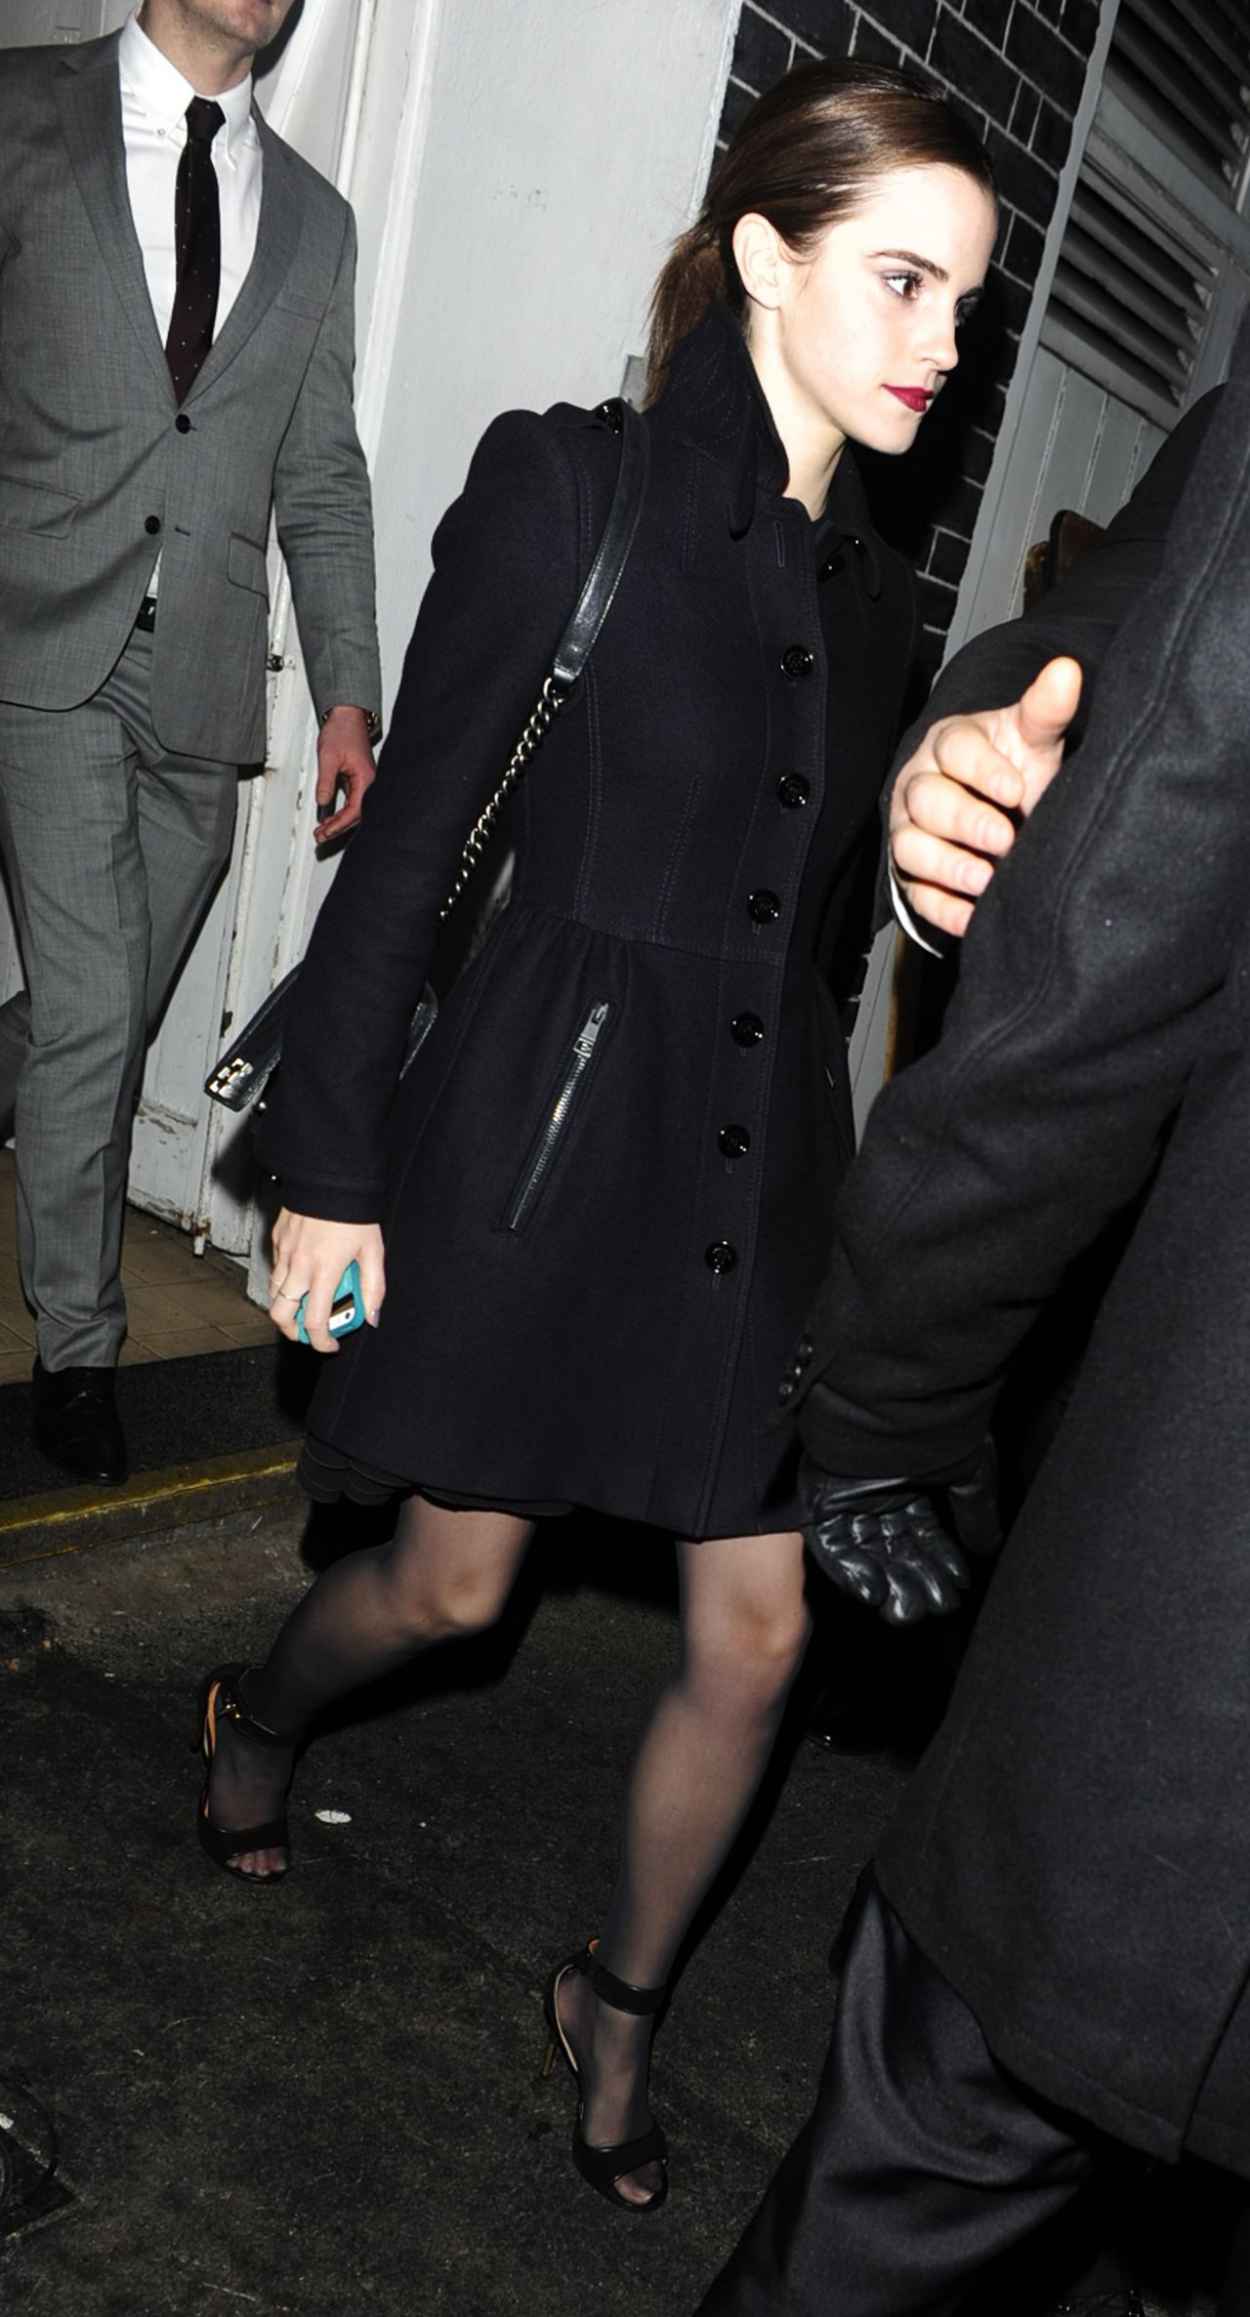 Emma Watson Leaving Lady Gagas Private Gig in London - December 2015-3